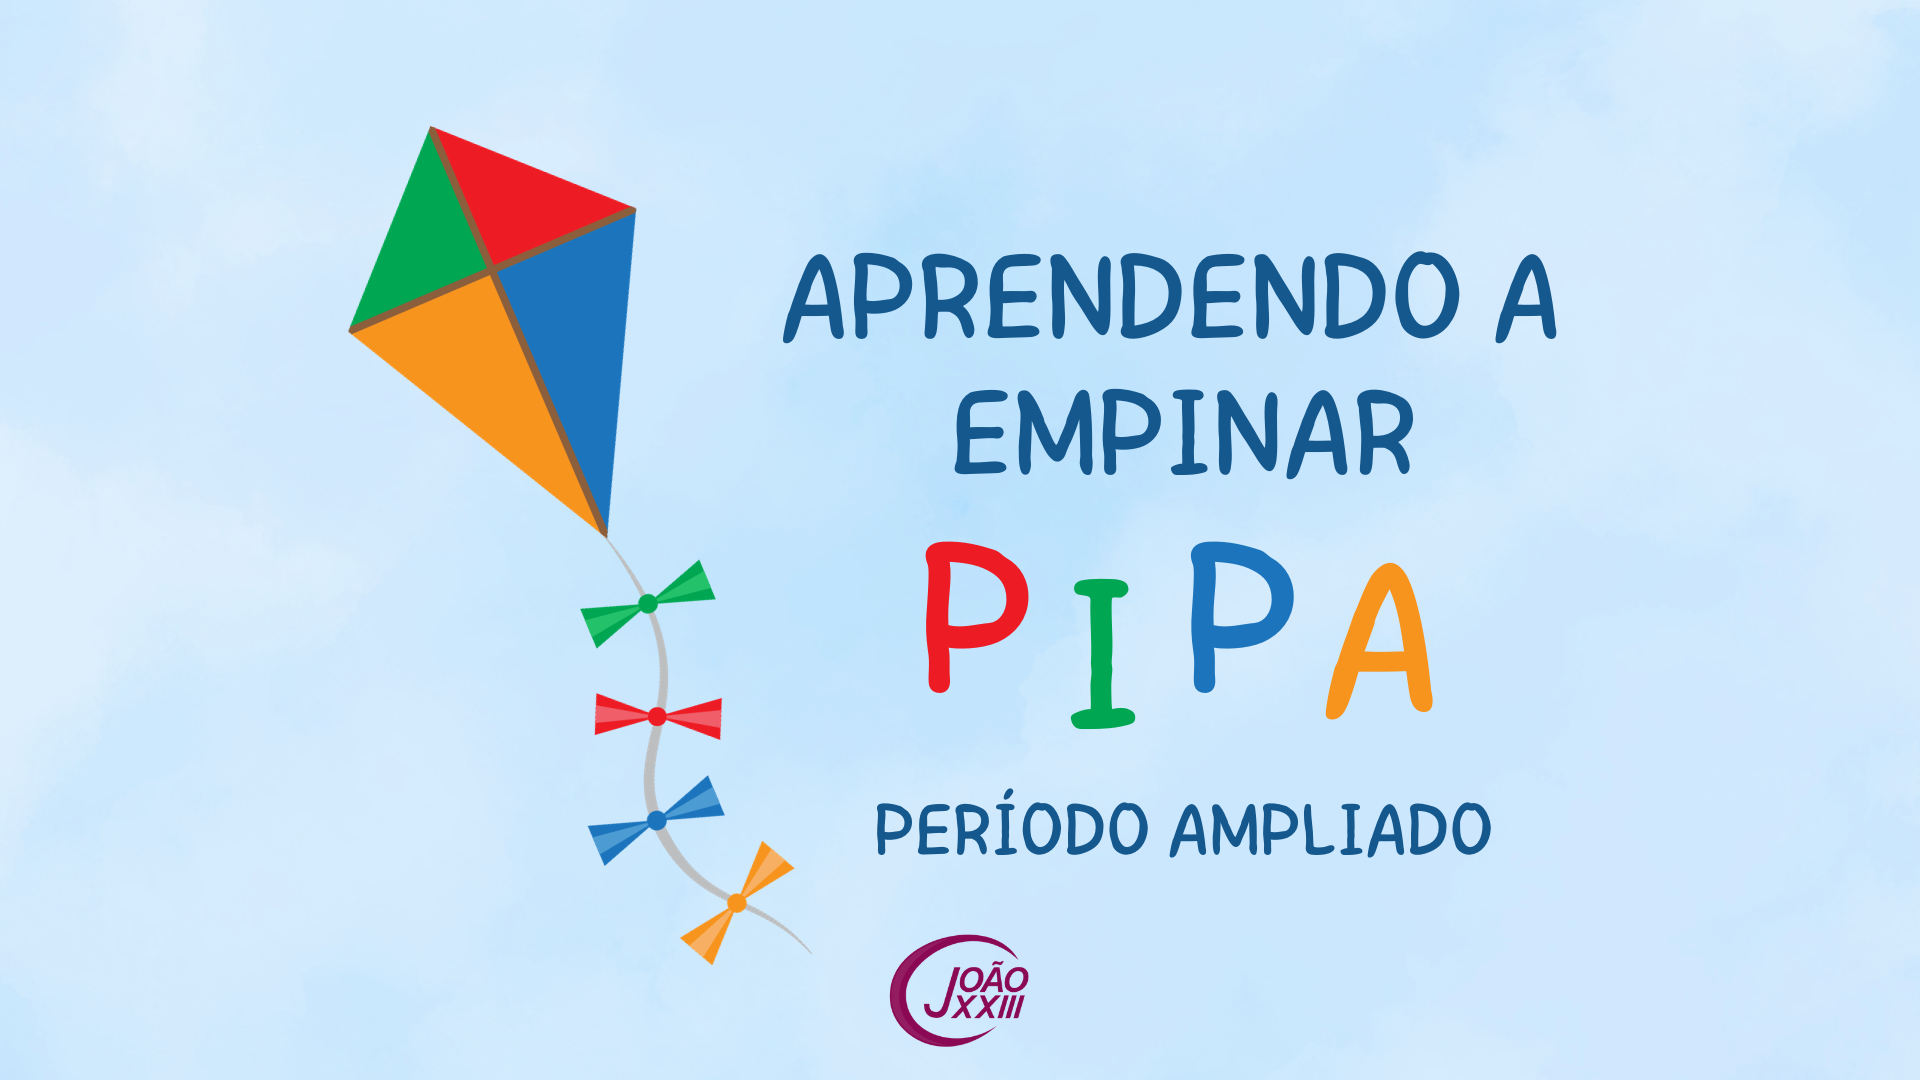 You are currently viewing Aprendendo a empinar pipa